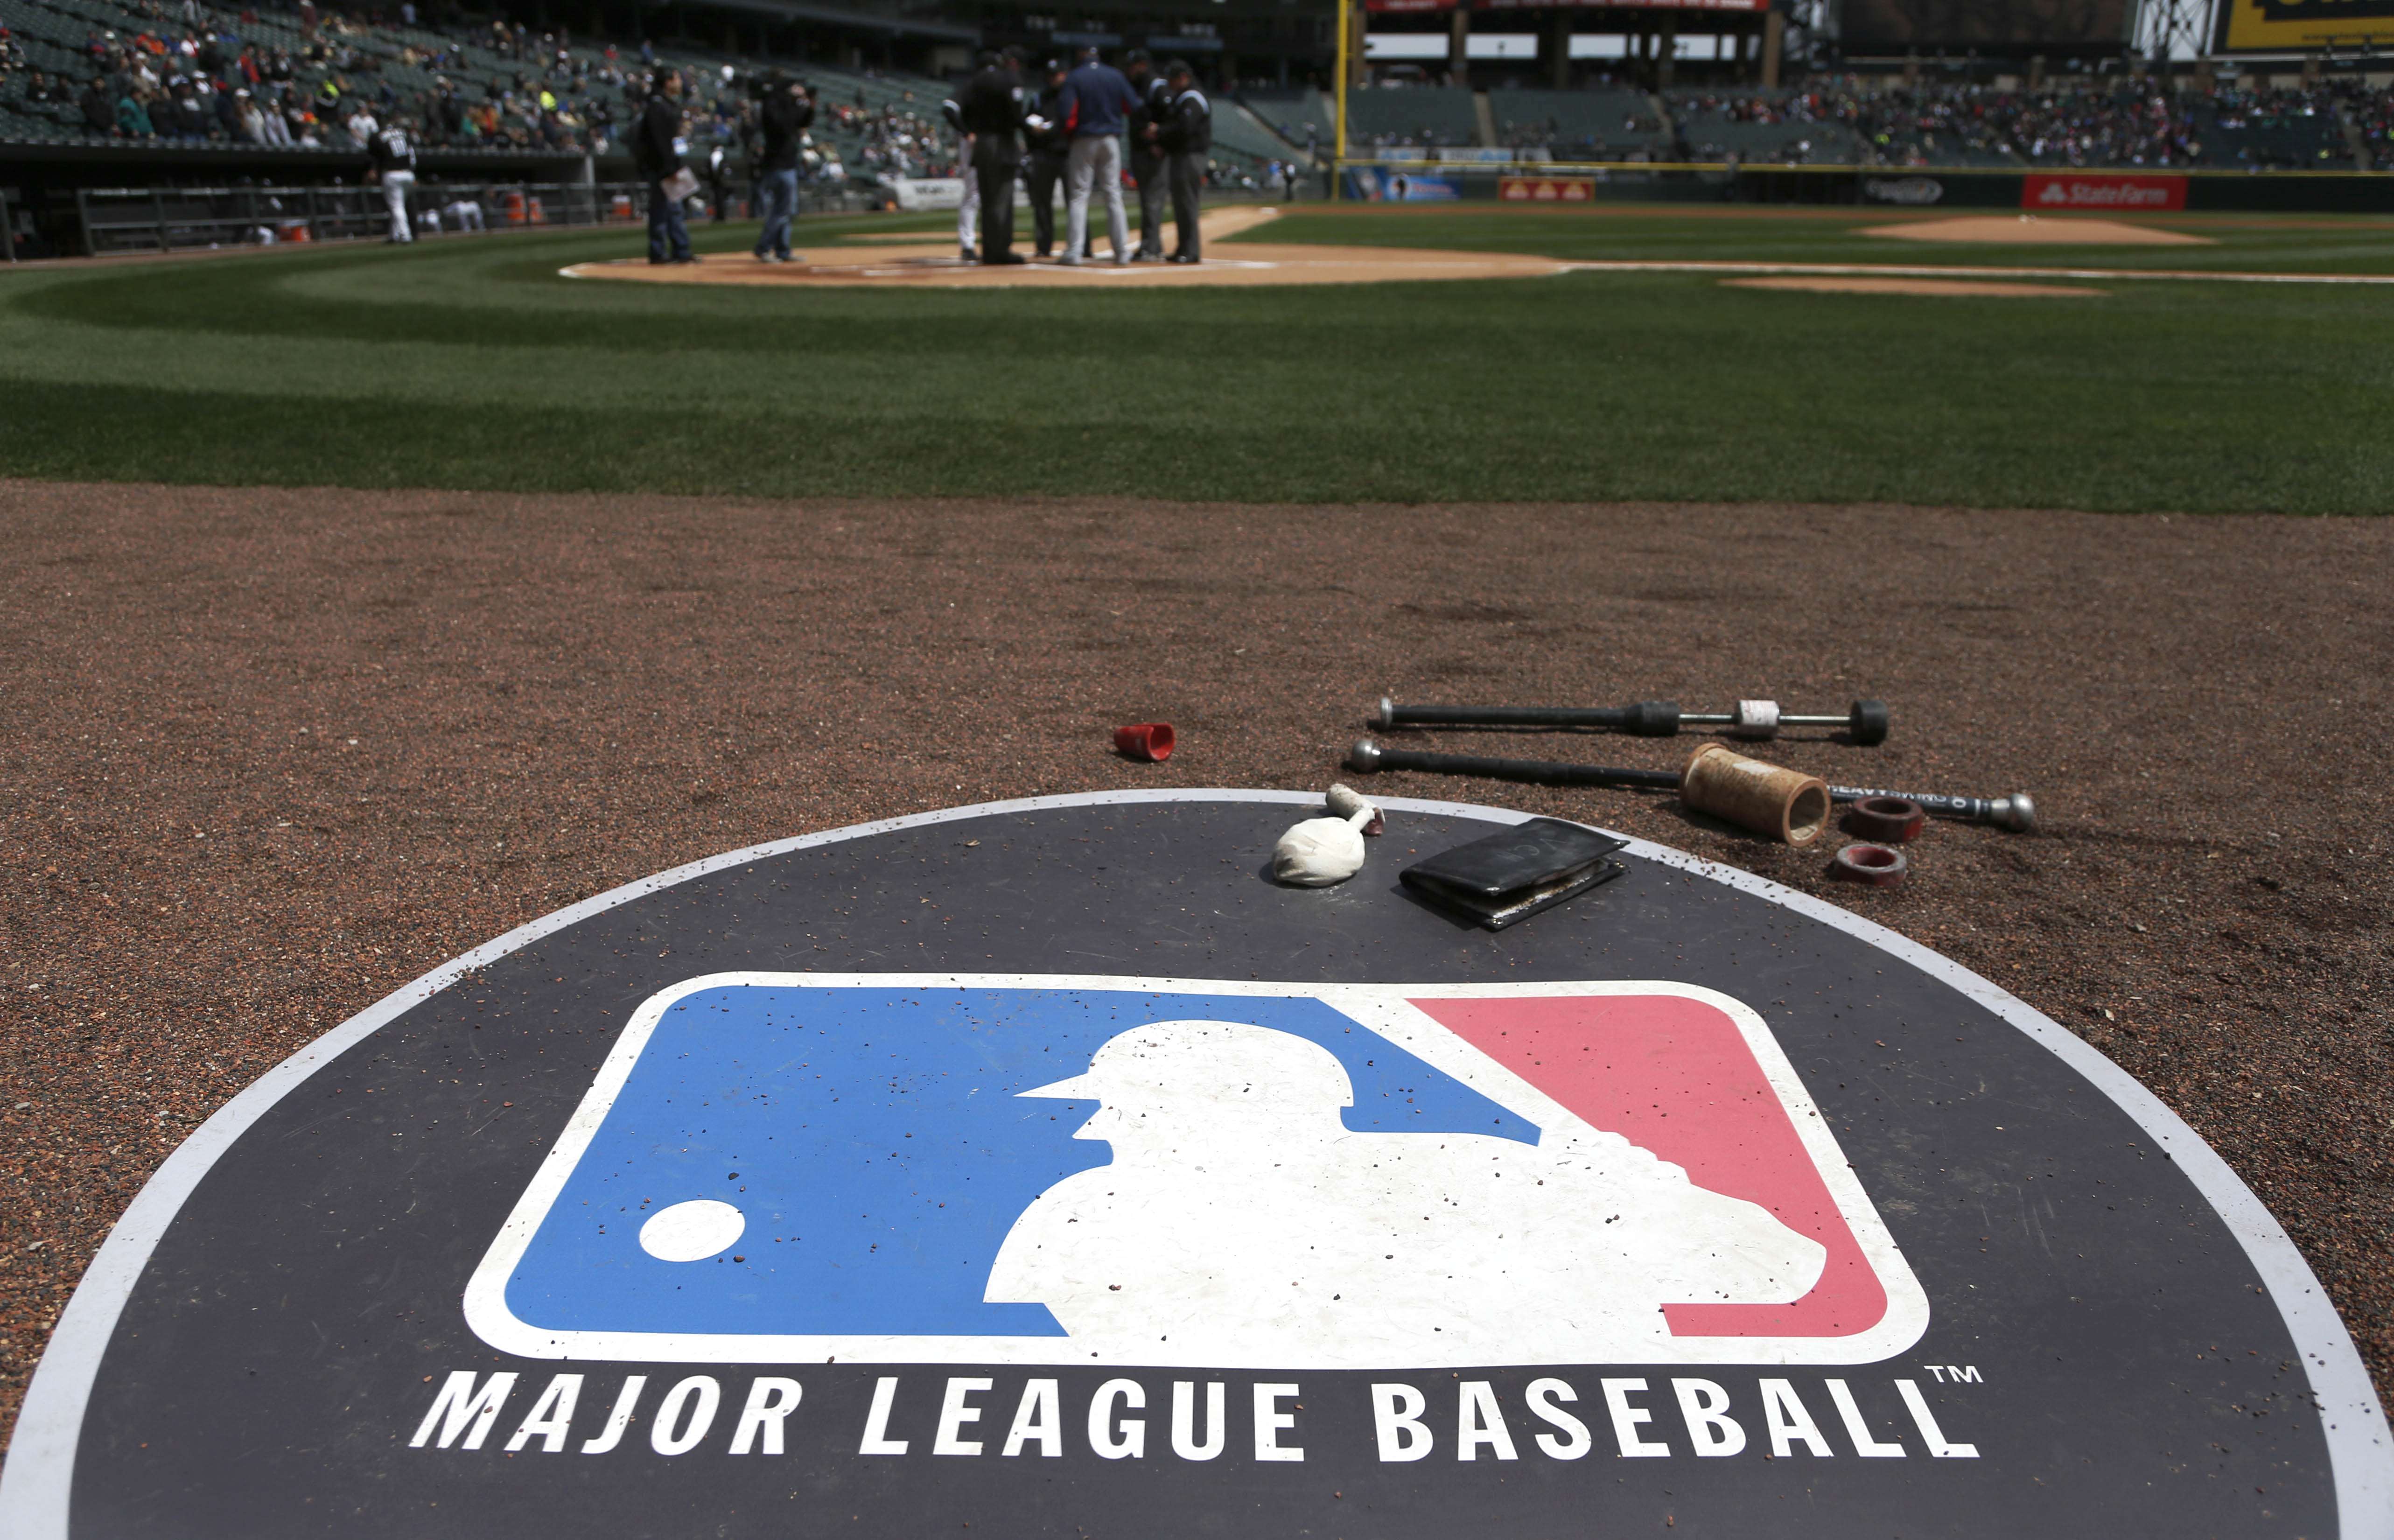 Mlb Regular Season Schedule 2022 Mlb Announces Complete 2022 Schedule; Opening Day Set For March 31 |  Bleacher Report | Latest News, Videos And Highlights